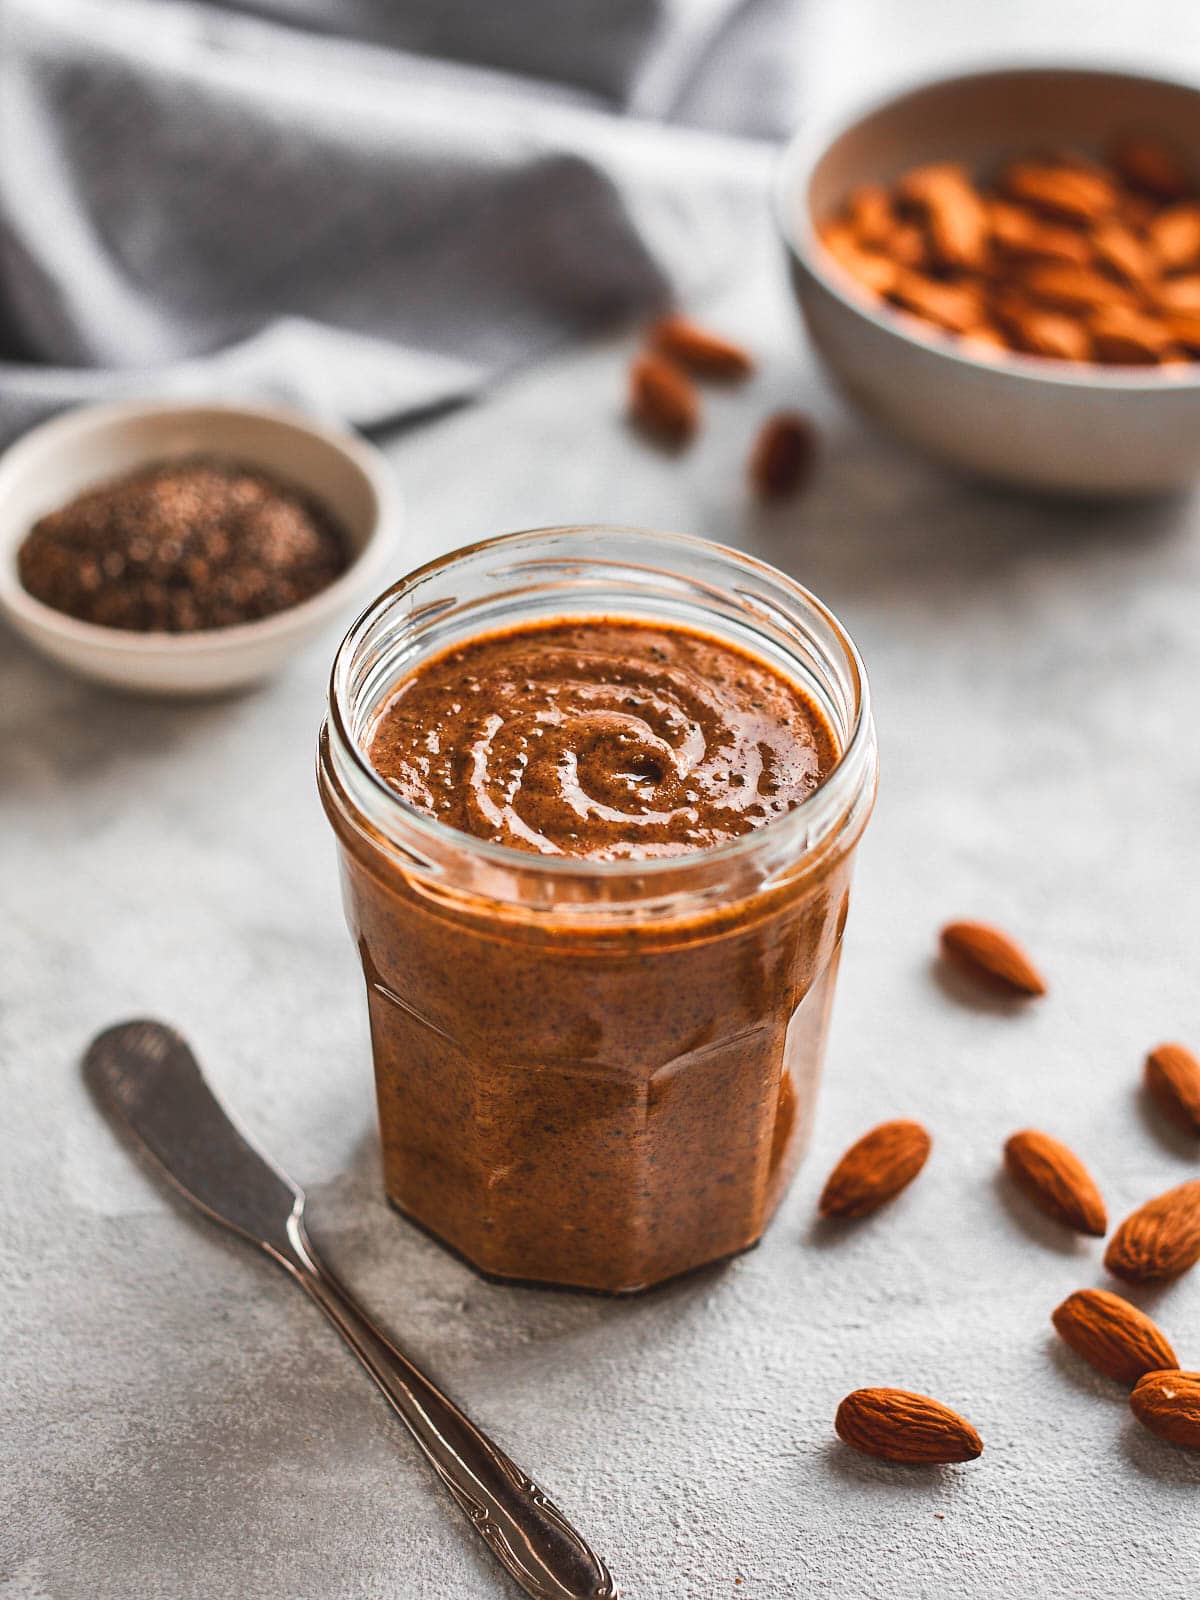 Almond and chia seed butter in a jar with a bowl of almonds and chia seeds behind